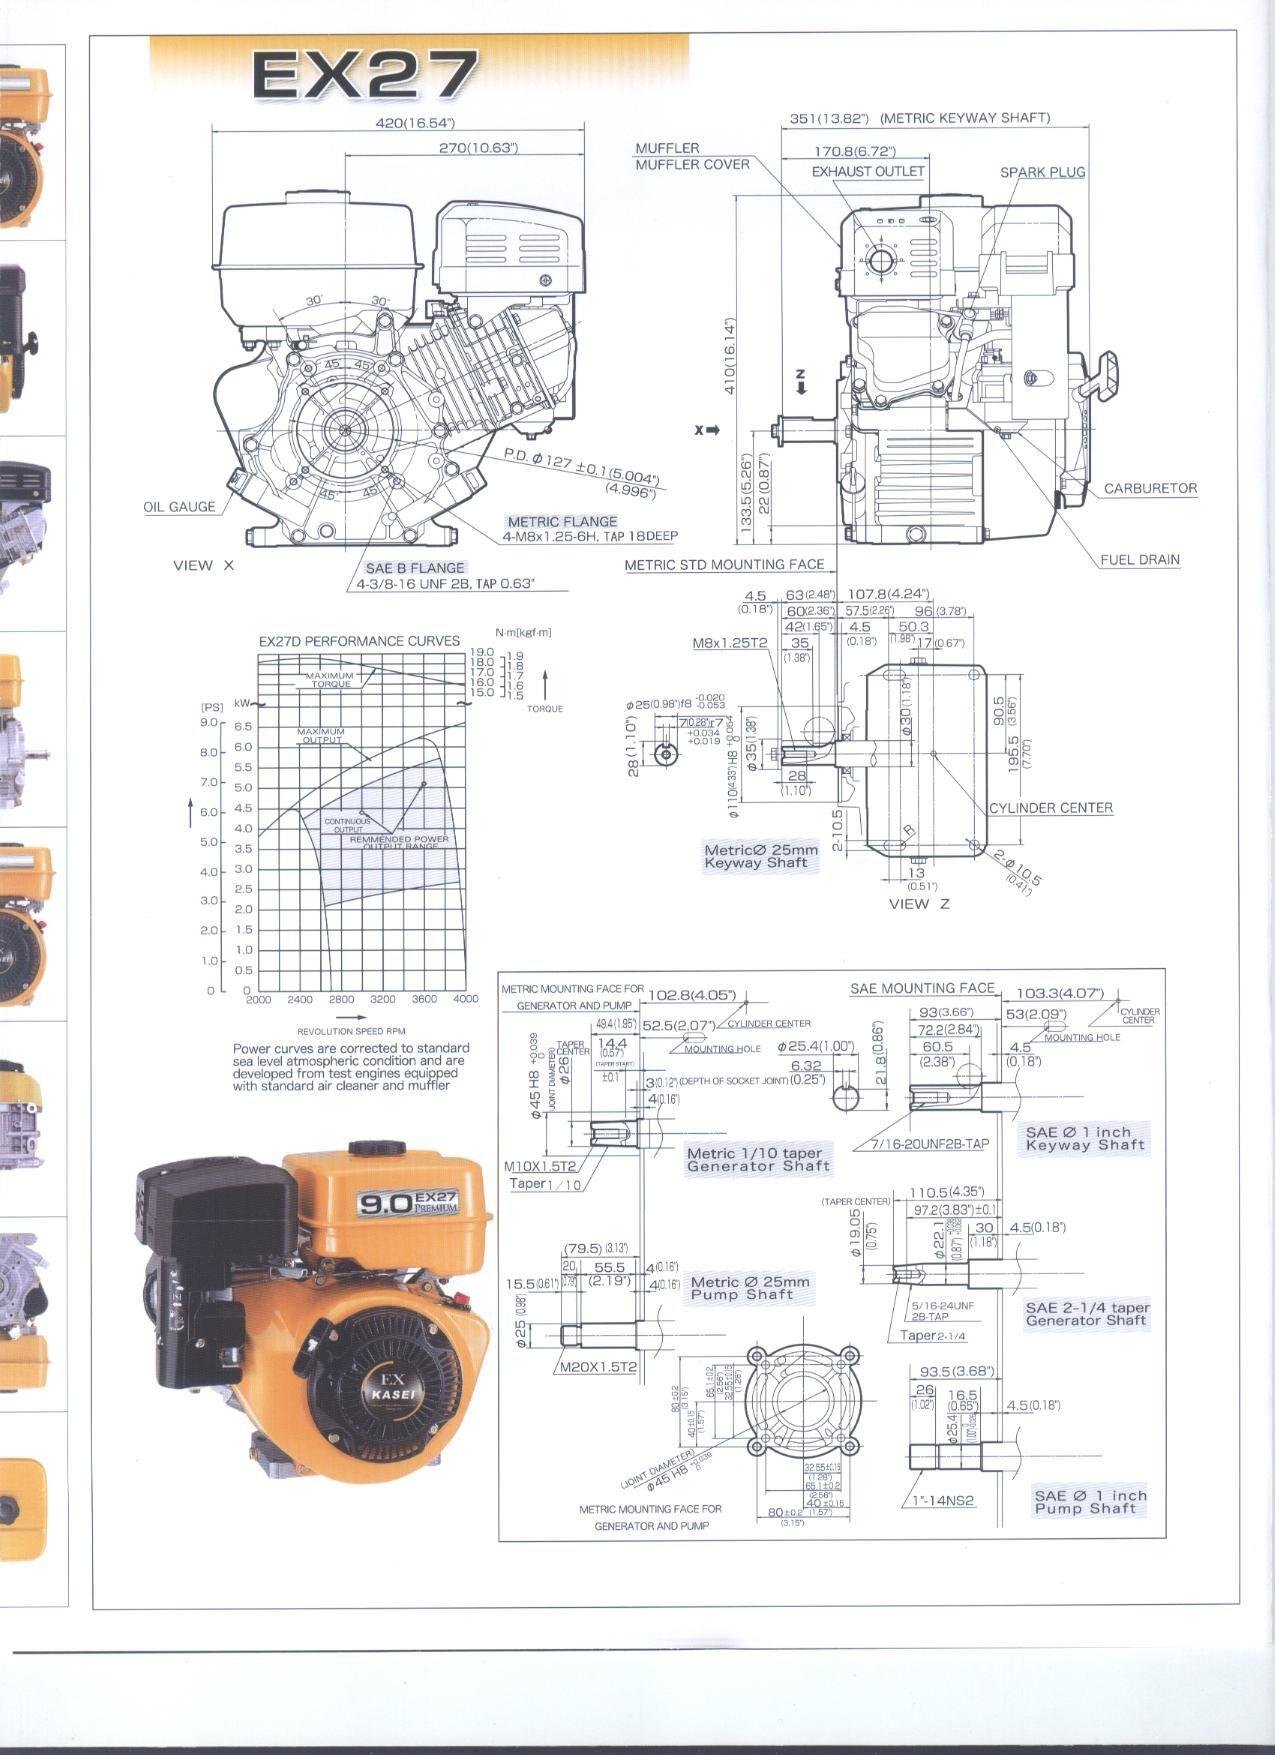 Four-stroke Air-cooled 9HP GASOLINE ENGINE 3